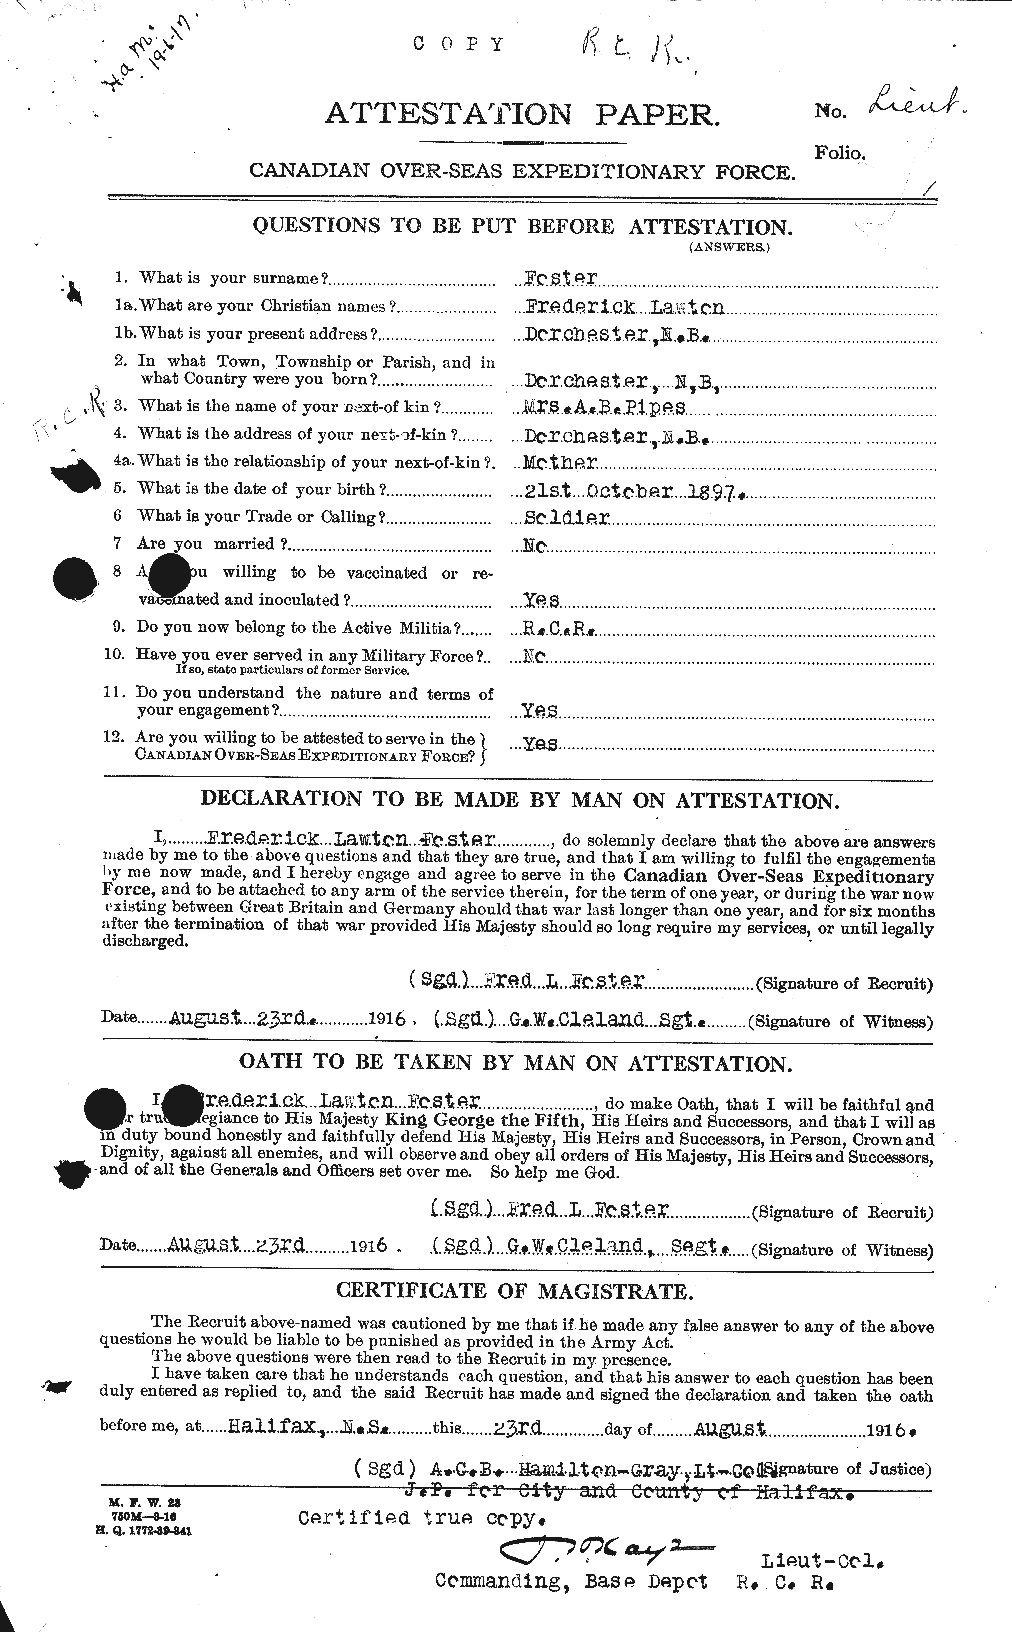 Personnel Records of the First World War - CEF 330655a